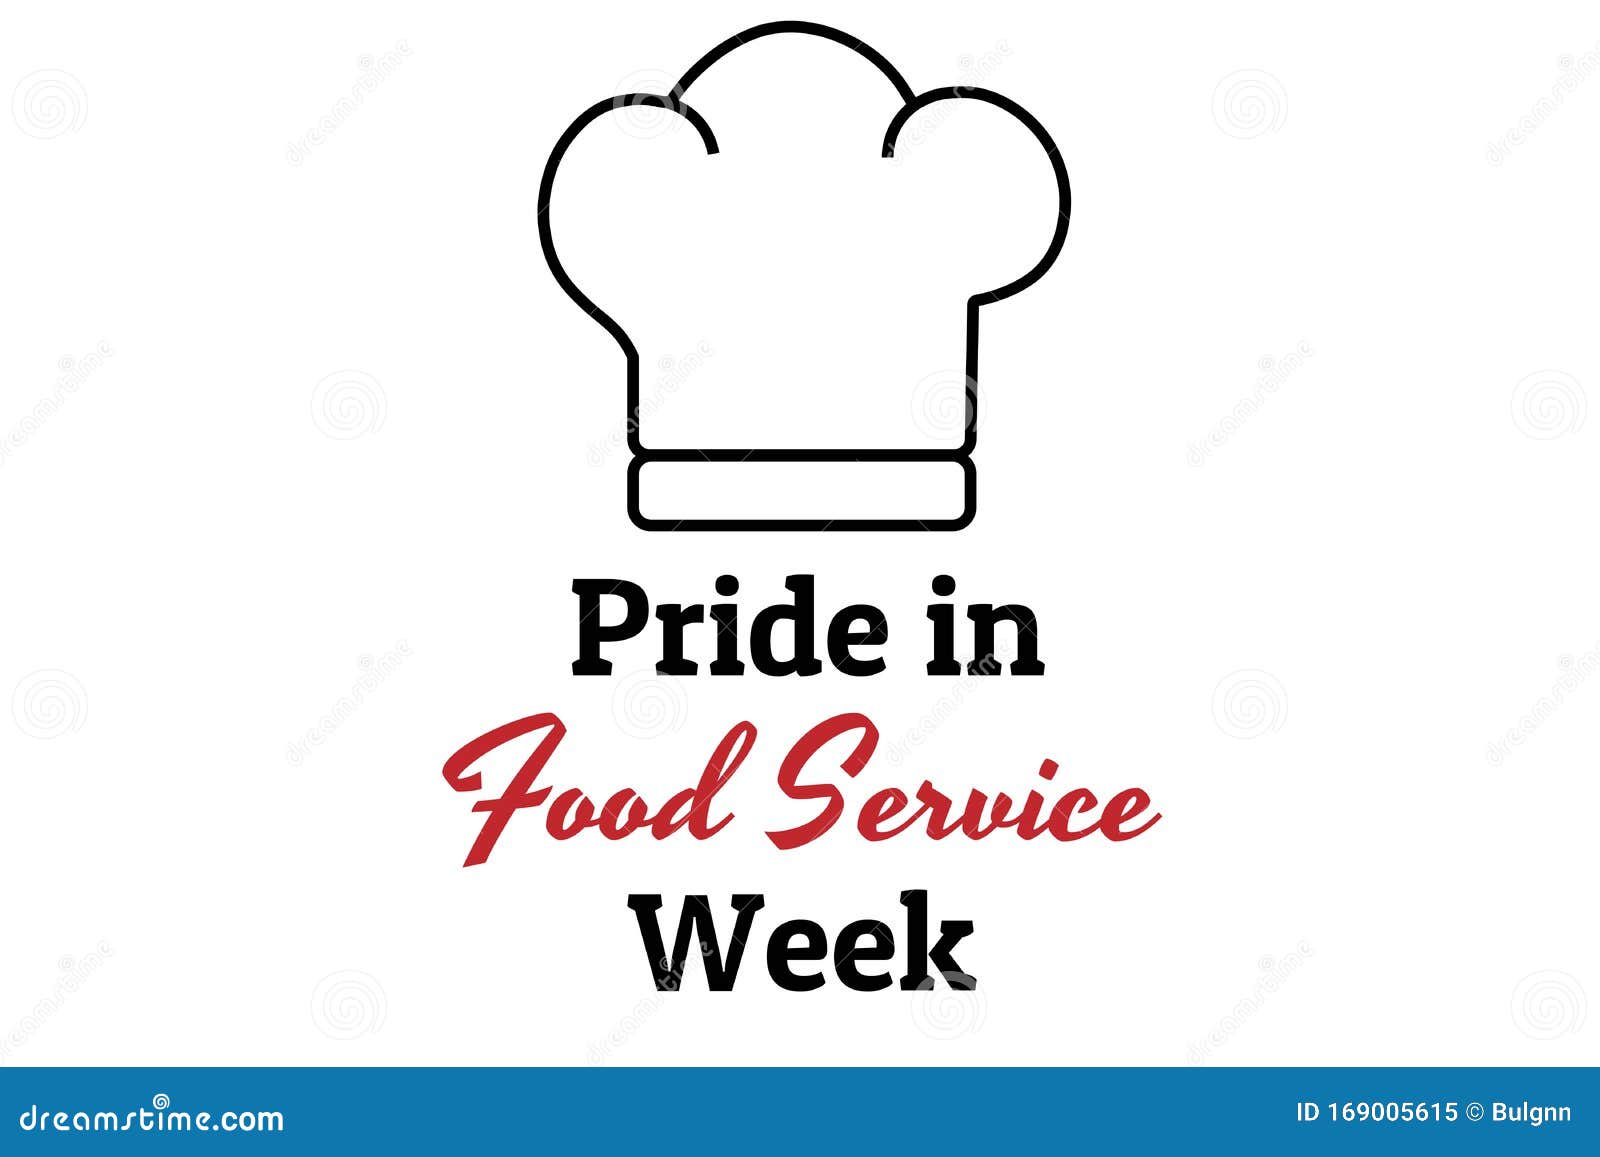 Pride in Food Service Week Concept Banner. Template for Background